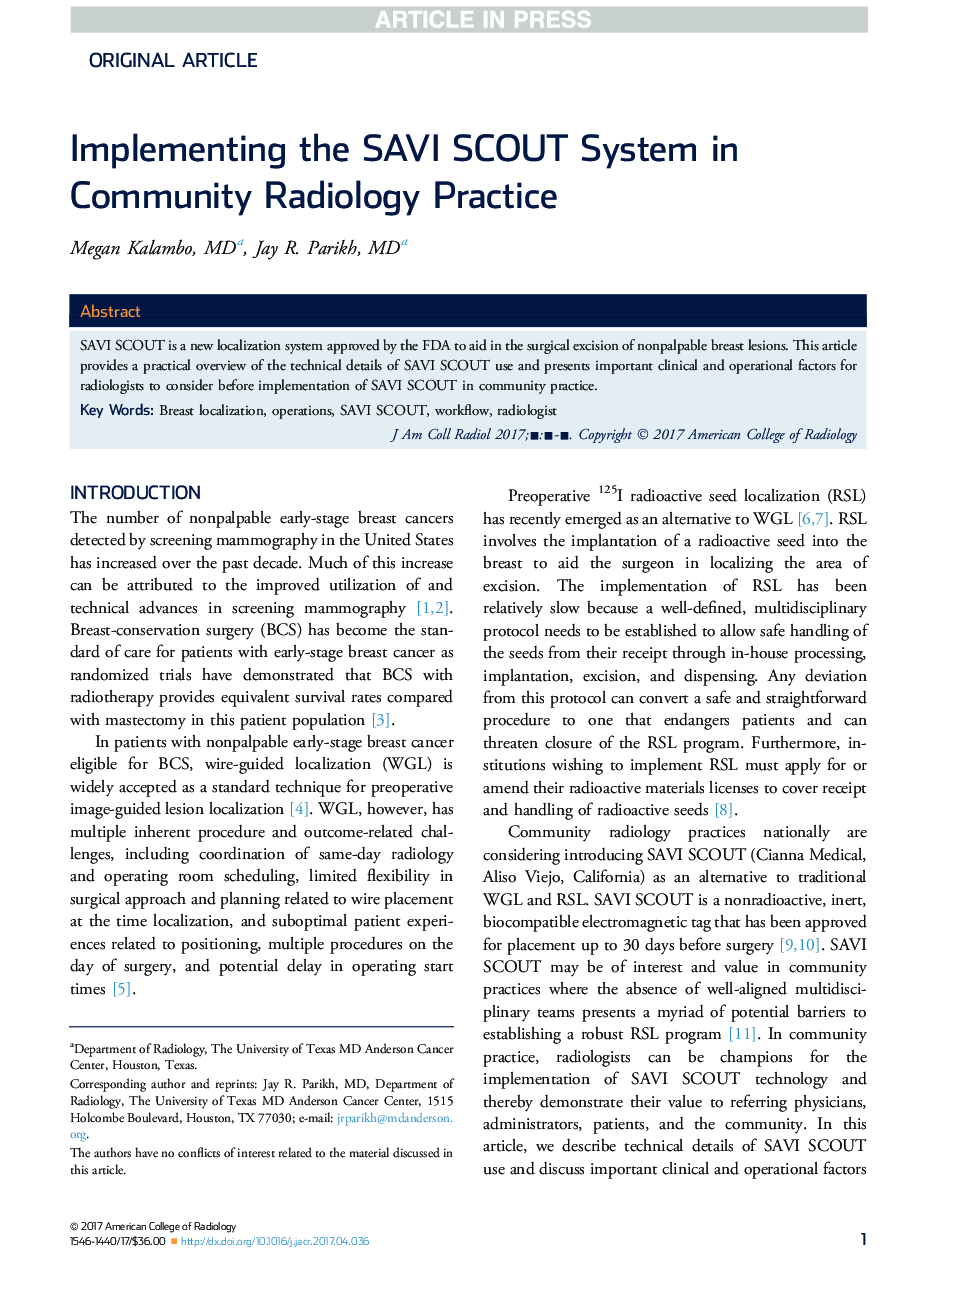 Implementing the SAVI SCOUT System in Community Radiology Practice